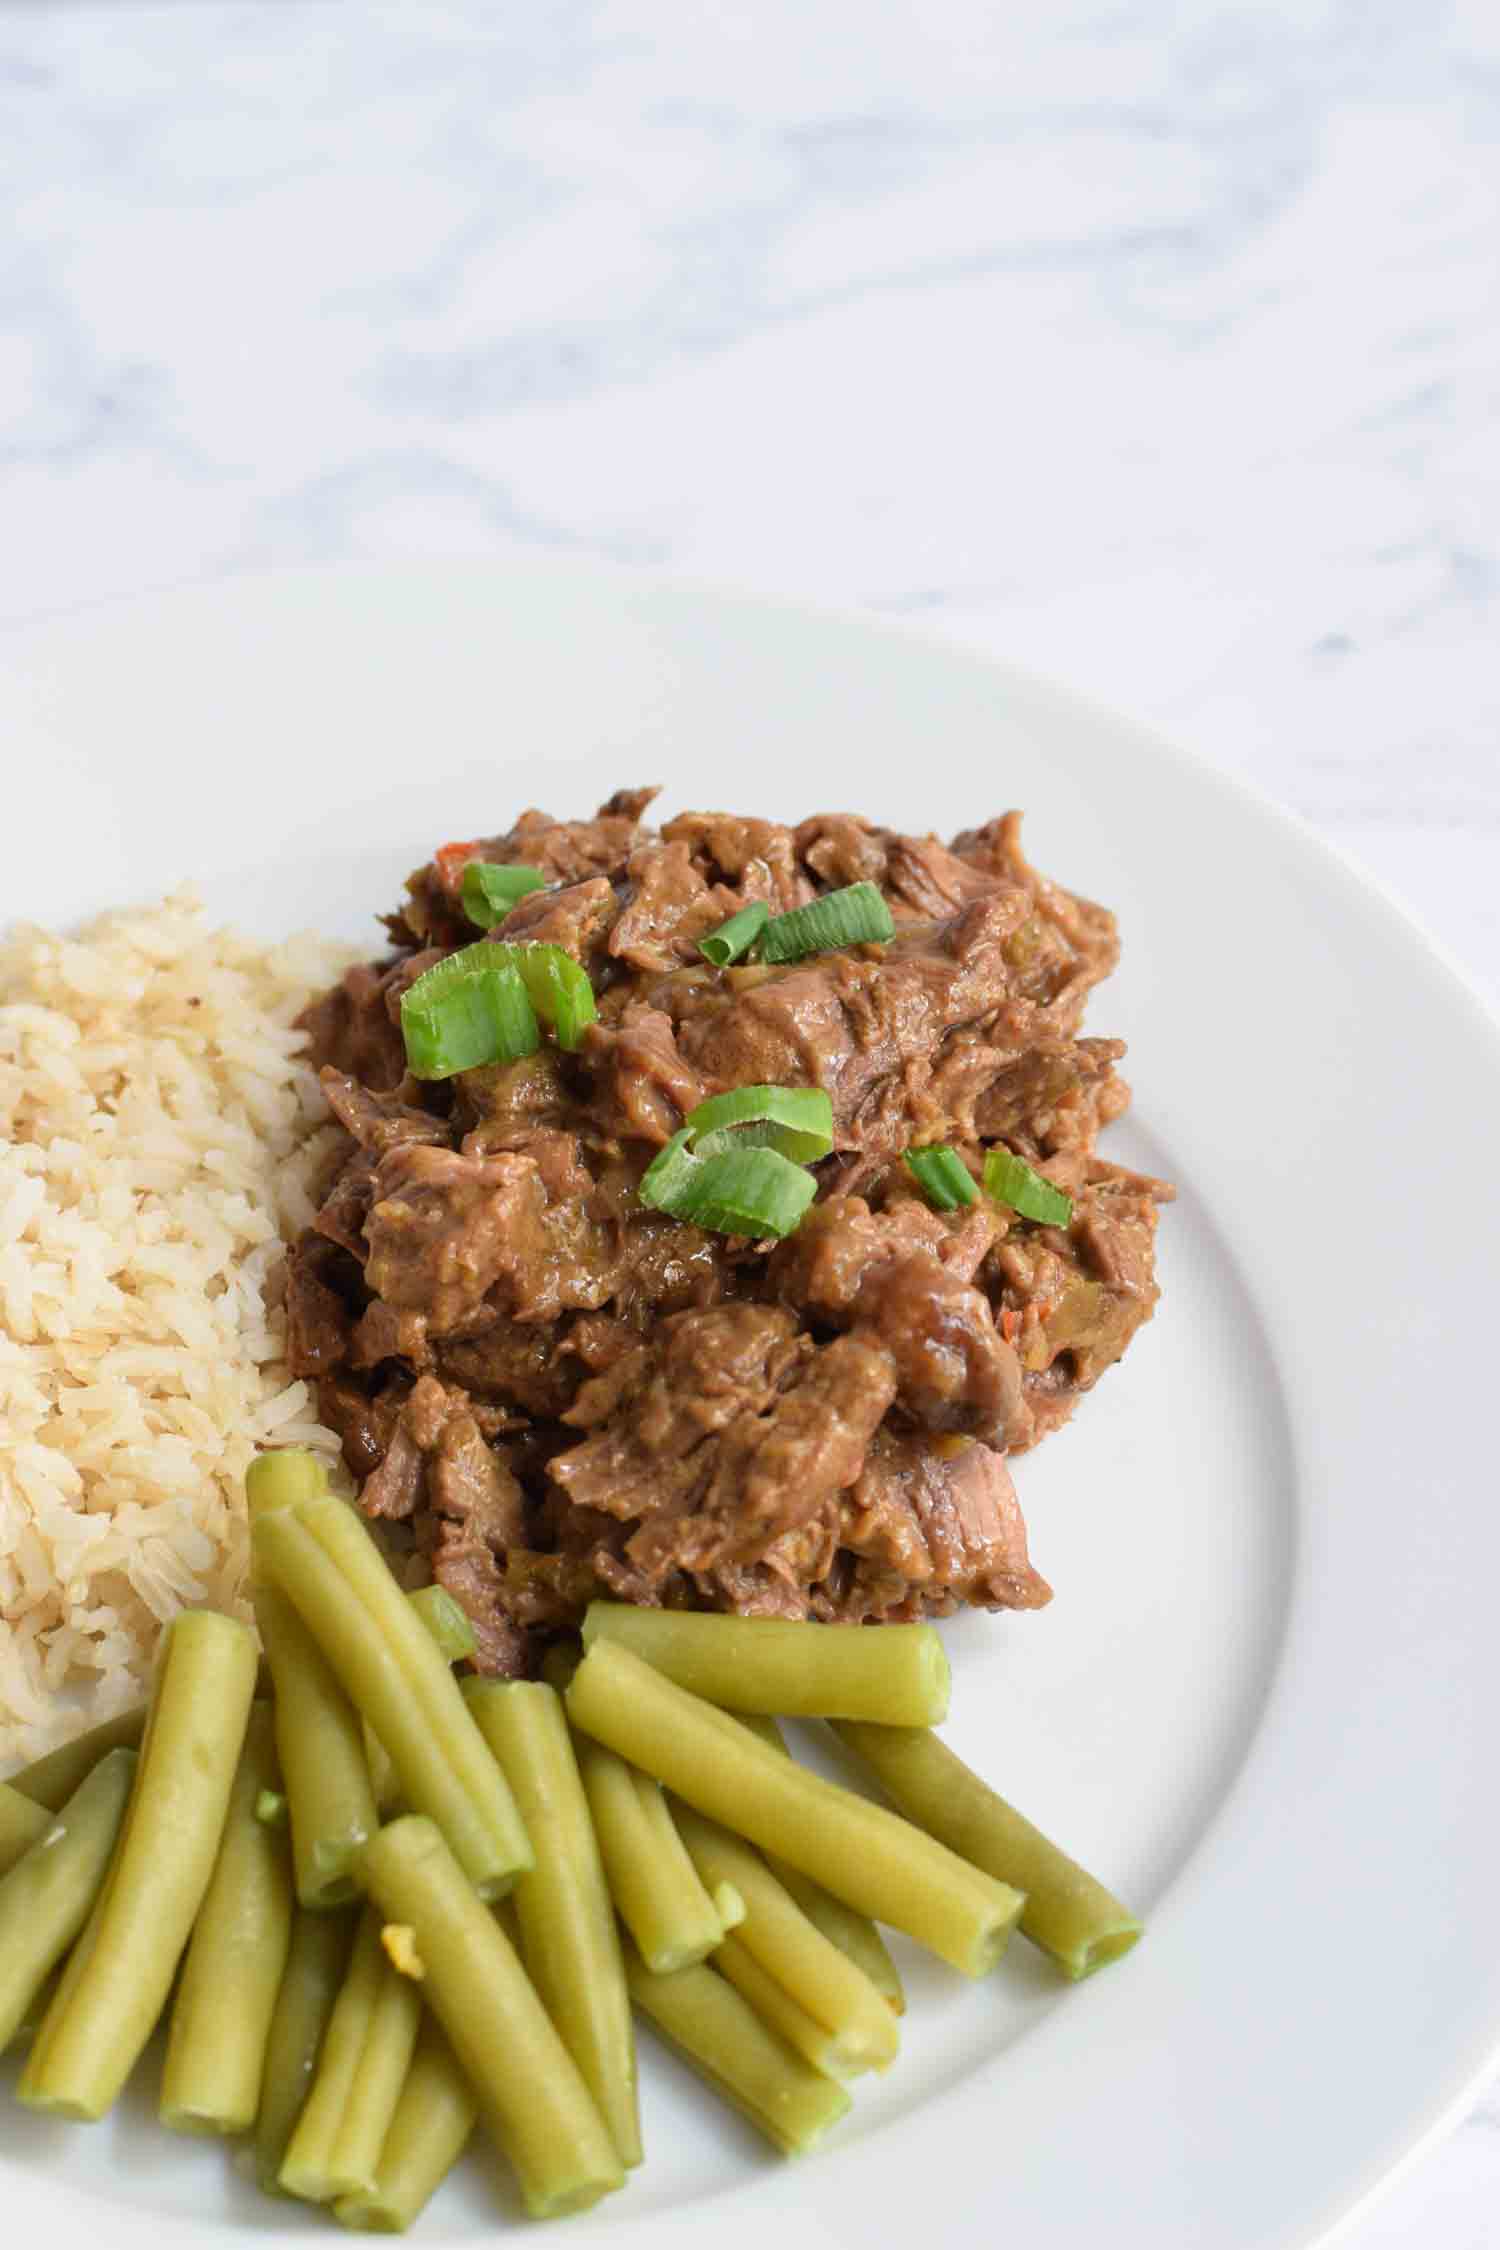 Low FODMAP rendang on a plate